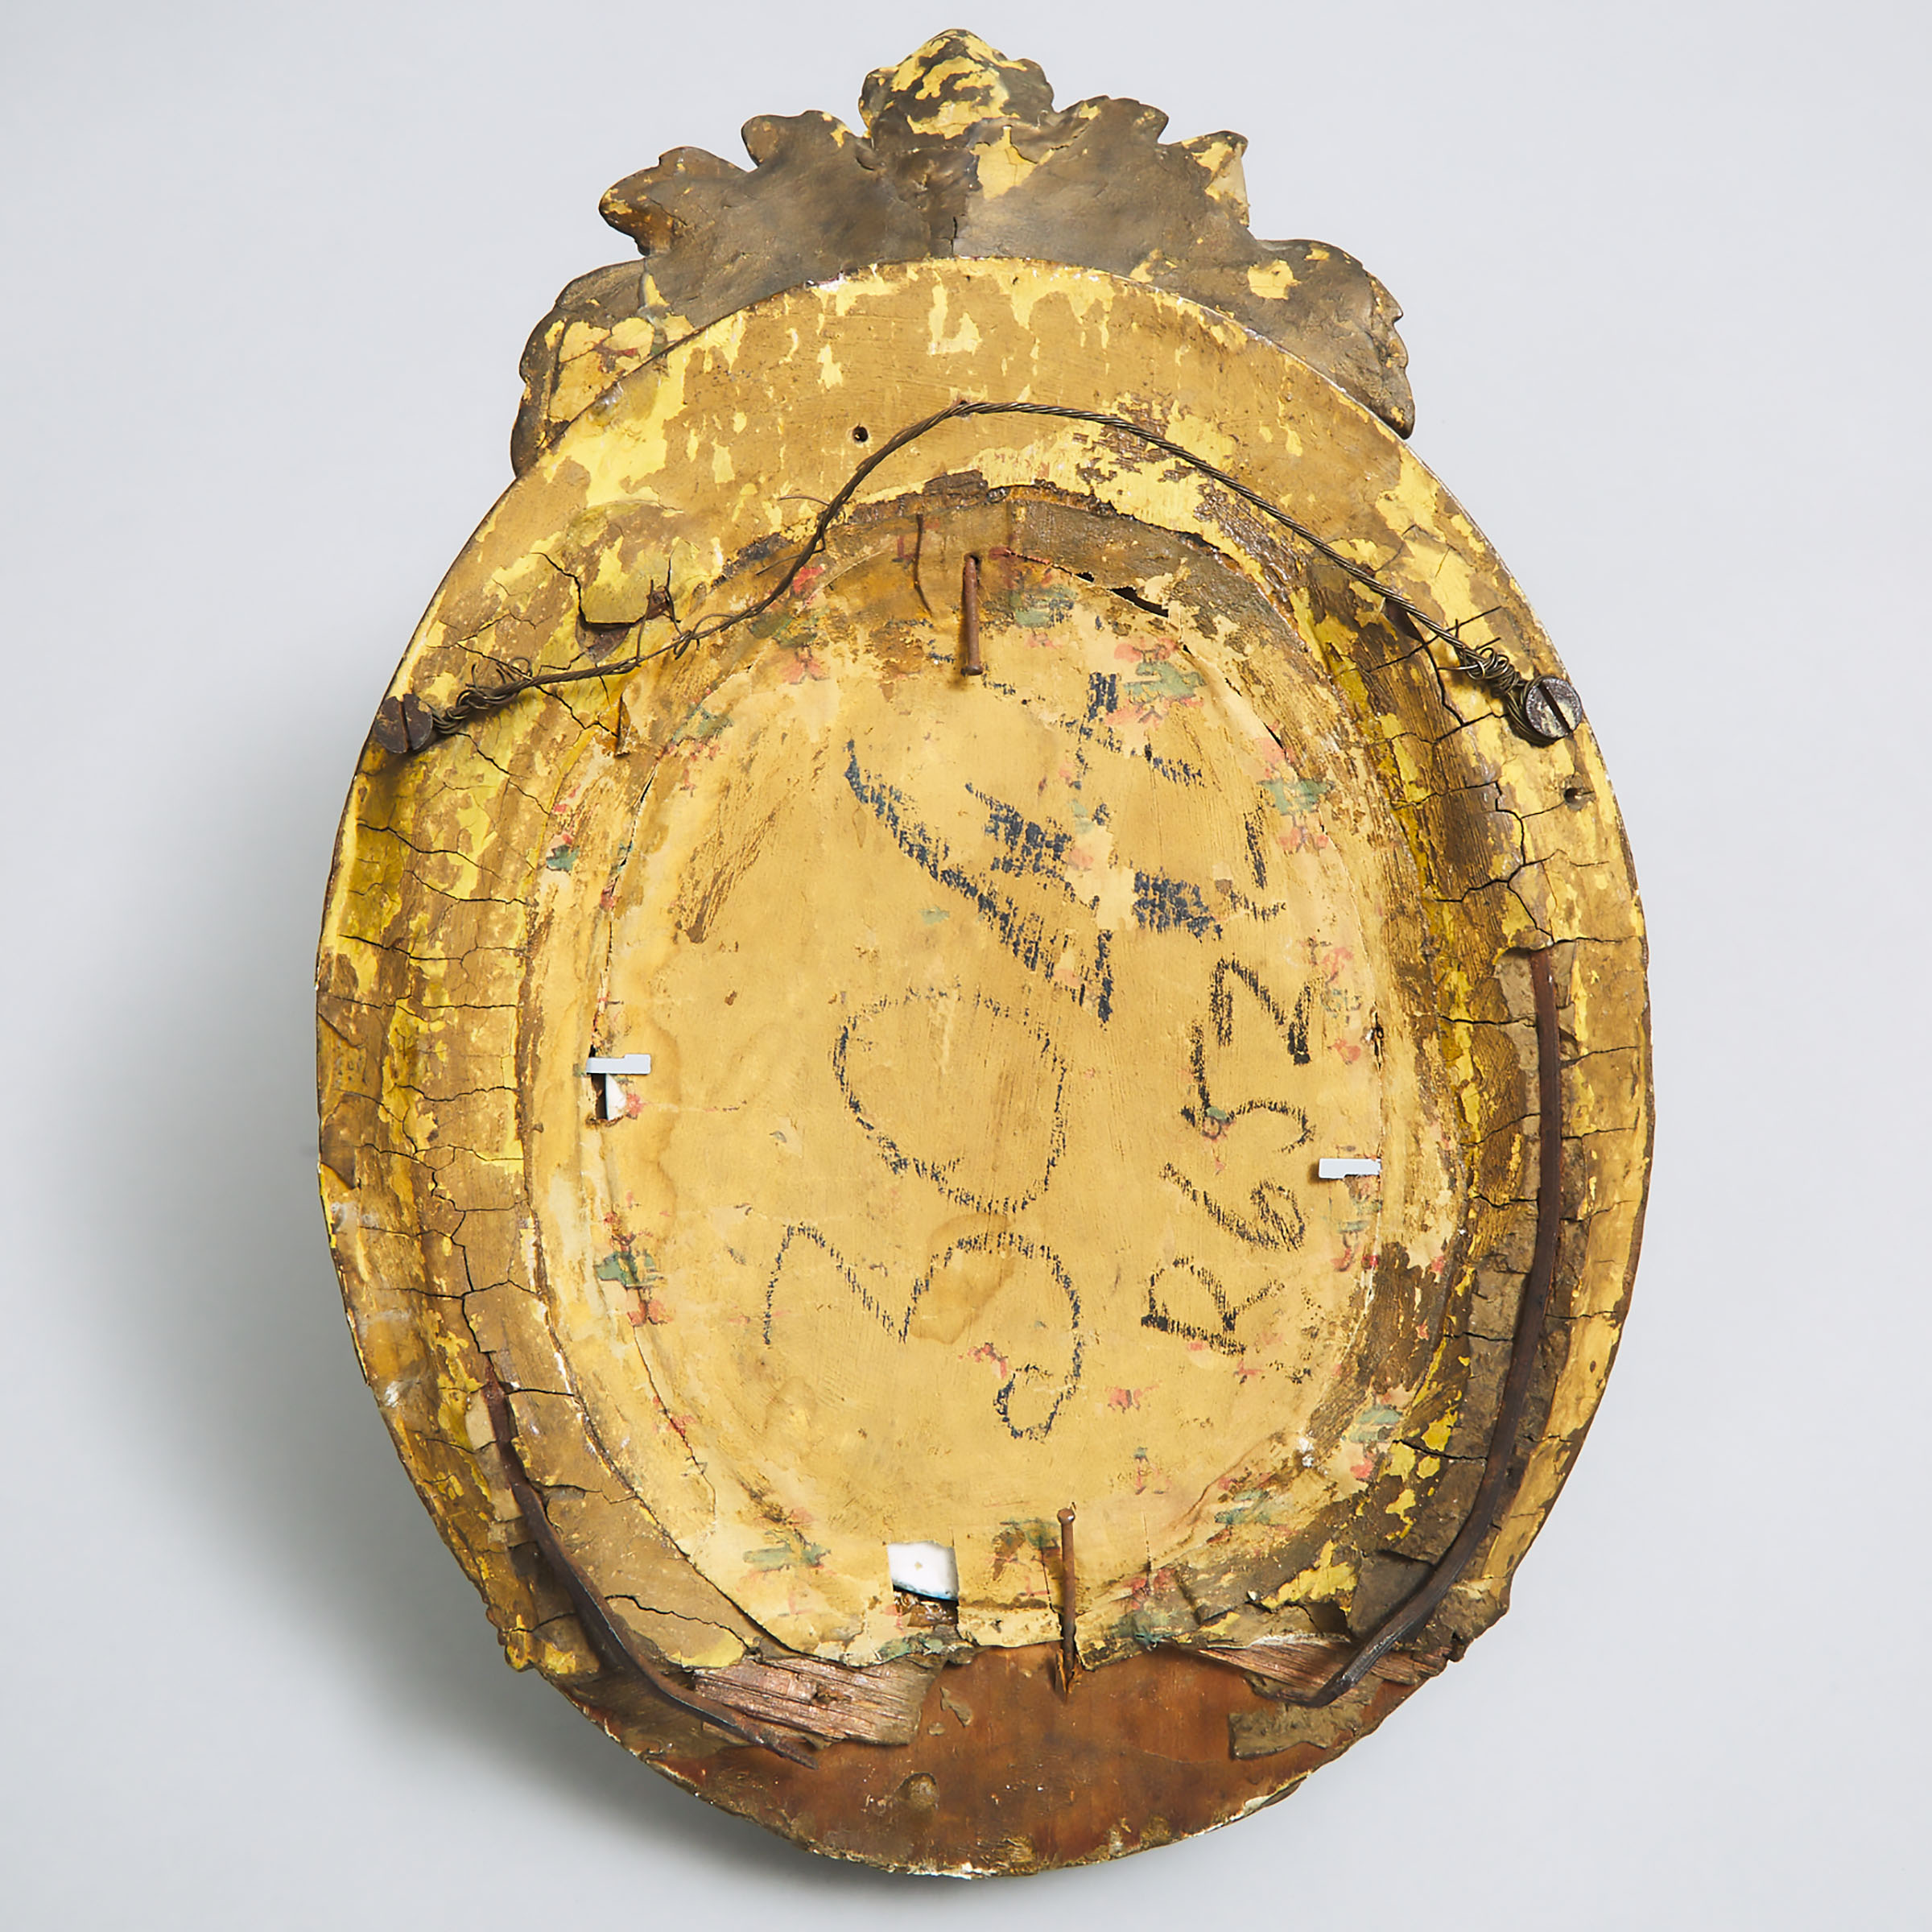 'Sèvres' Oval Plaque, late 19th century